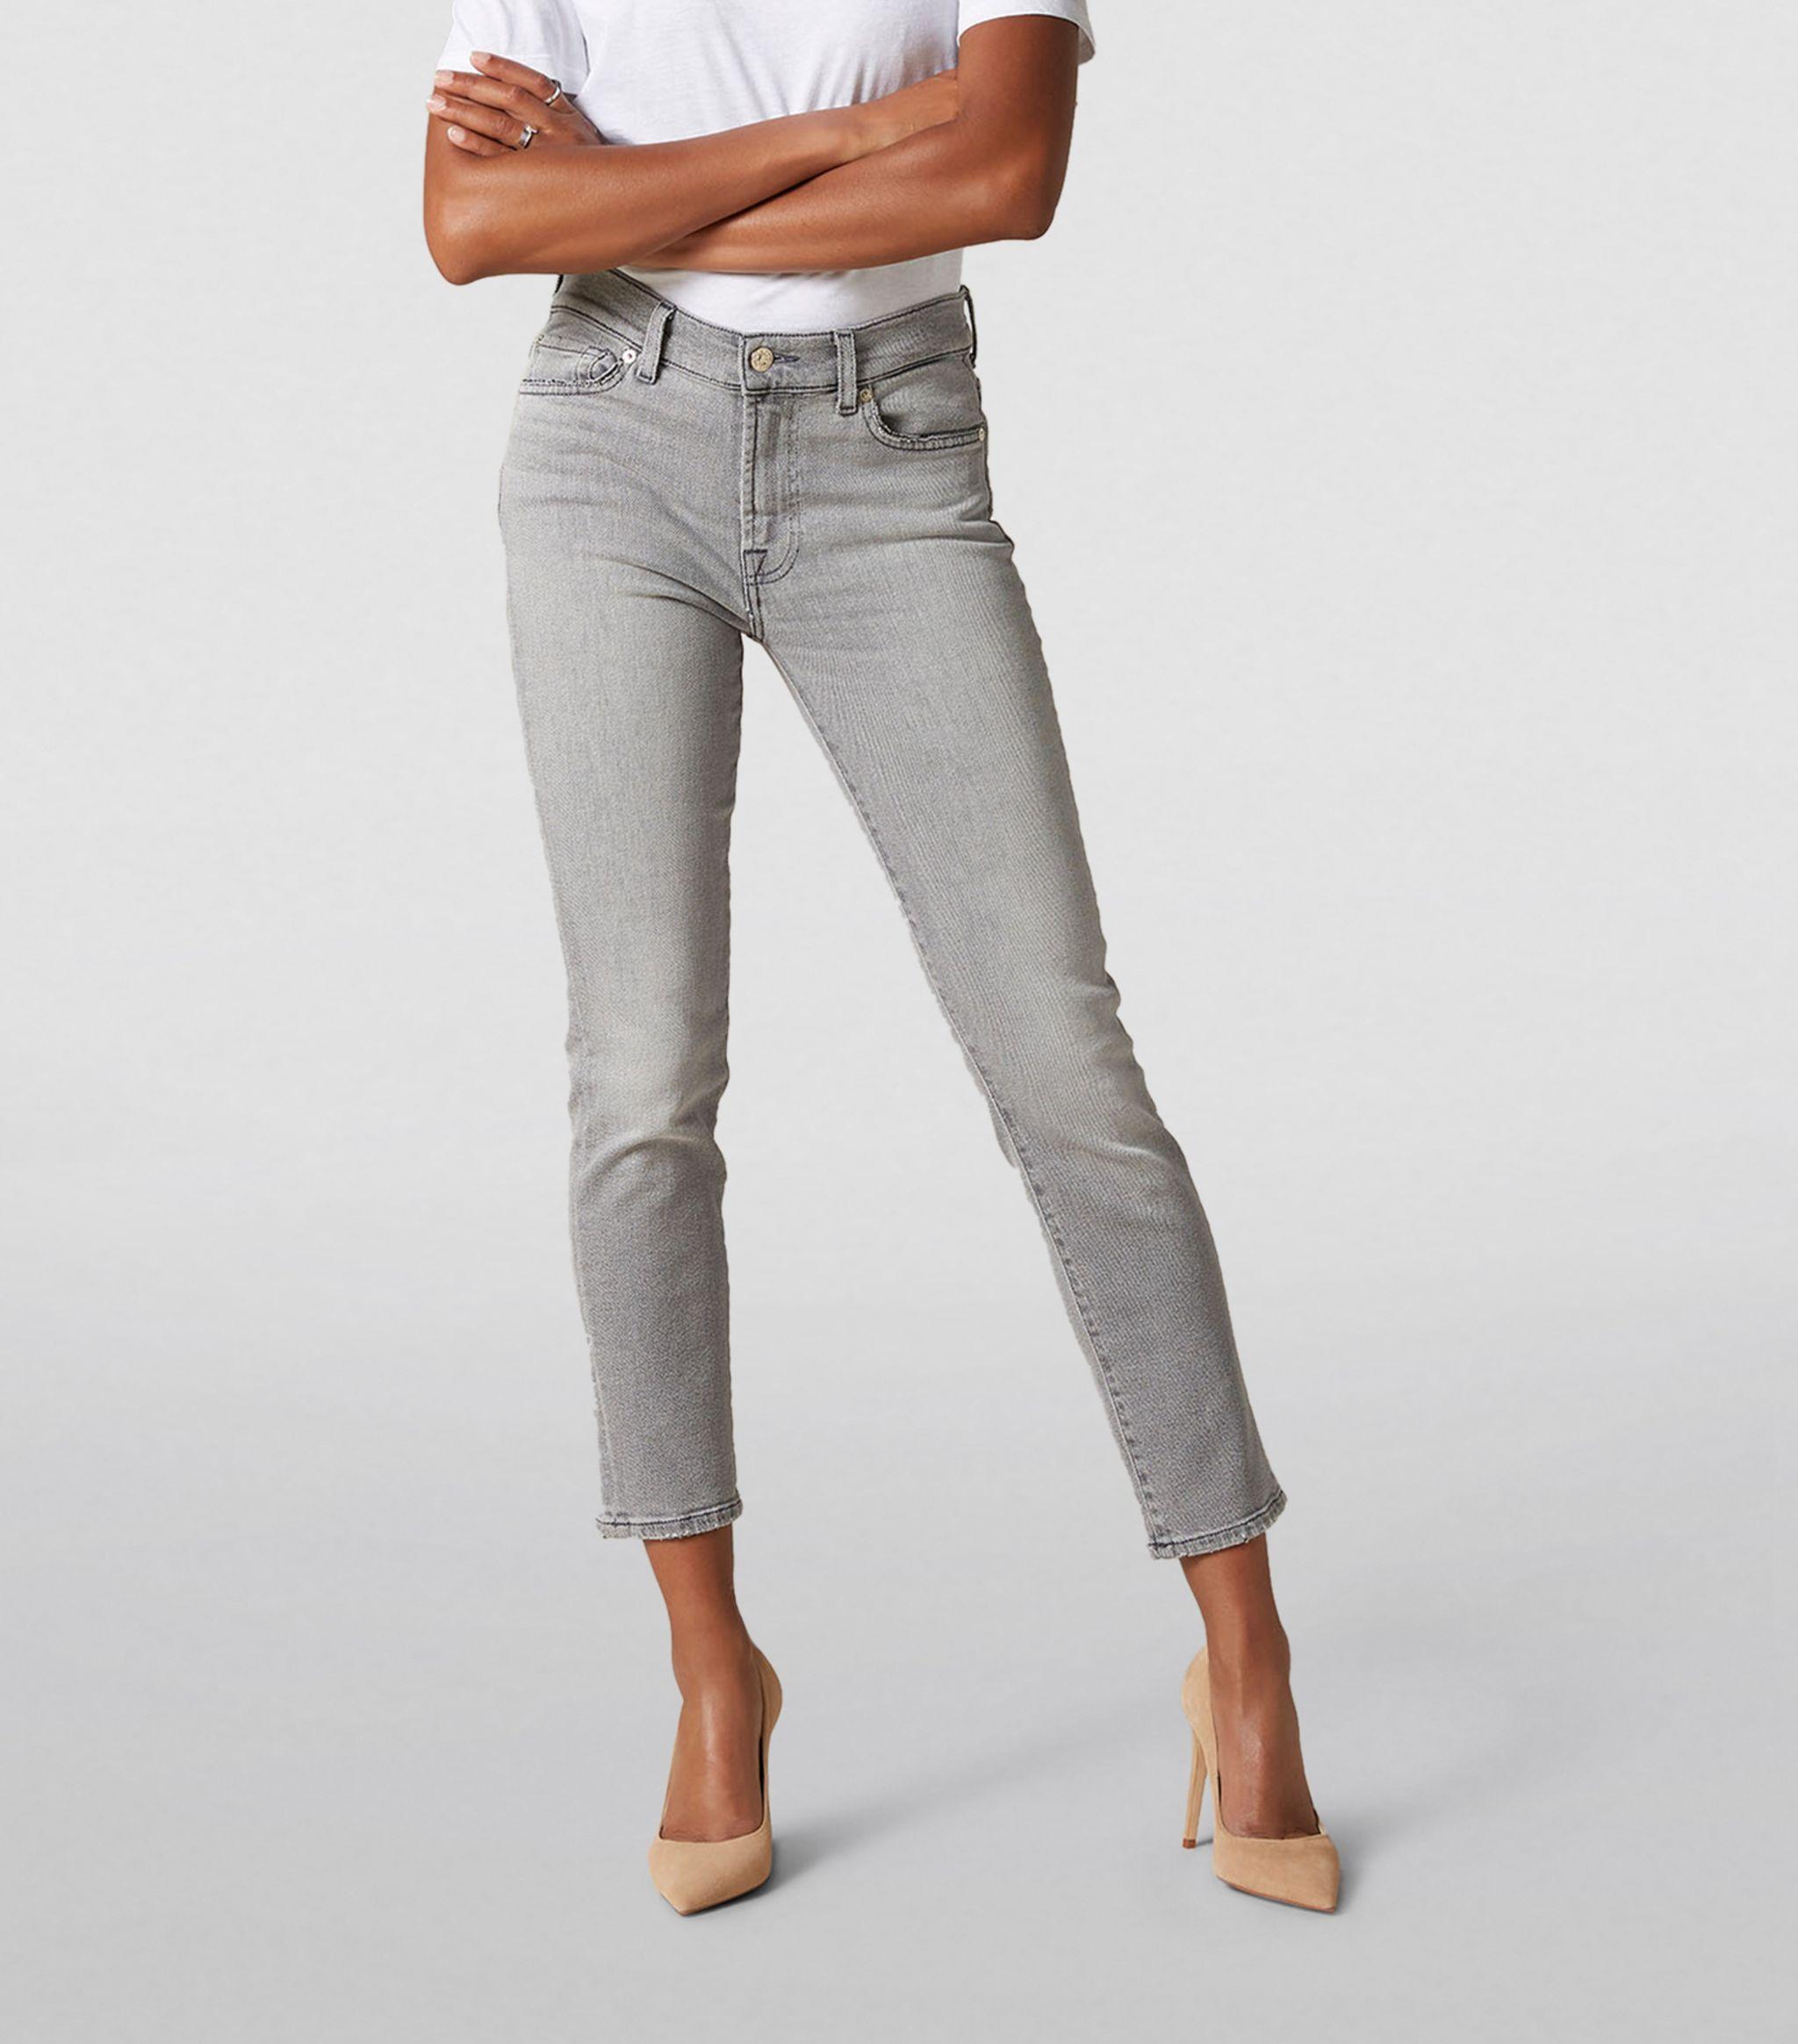 7 For All Mankind Denim Roxanne Luxe Vintage Ankle Jeans in Gray - Lyst